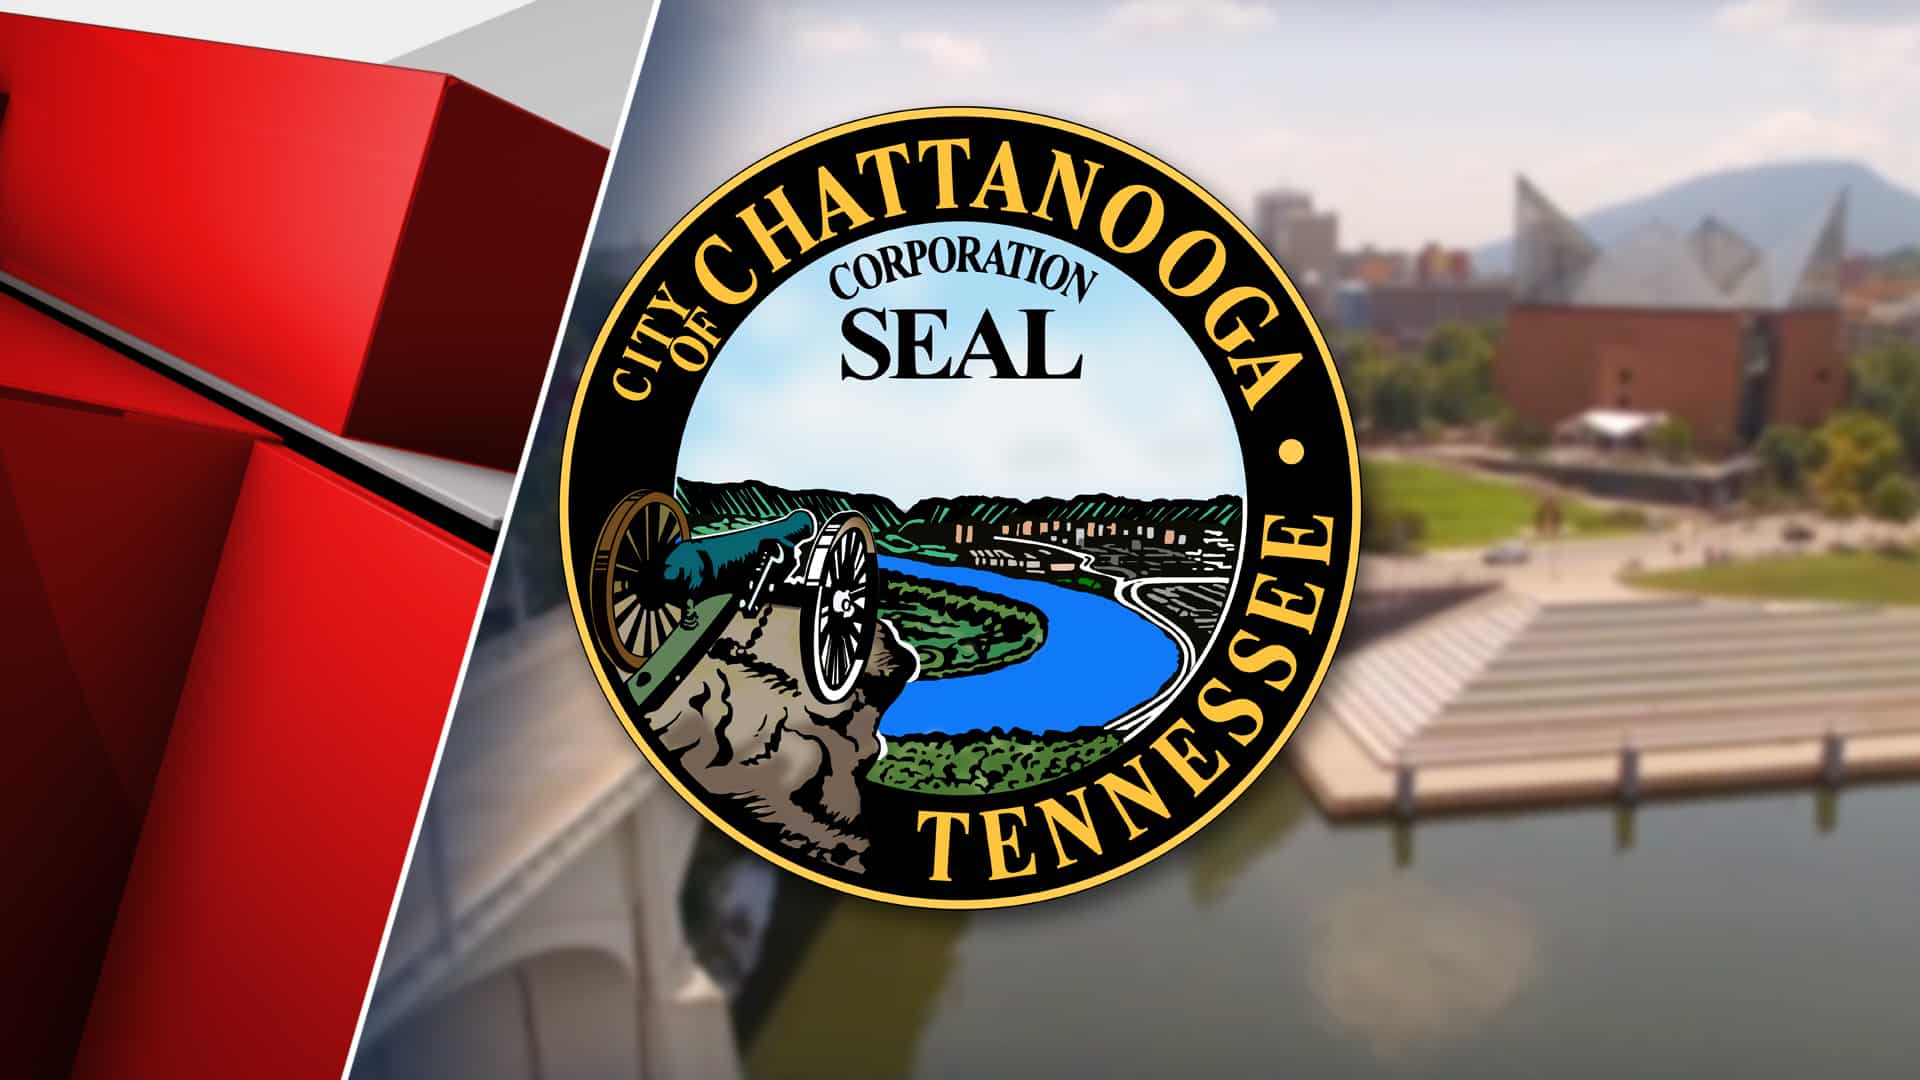 Chattanooga begins week of youth-centered events